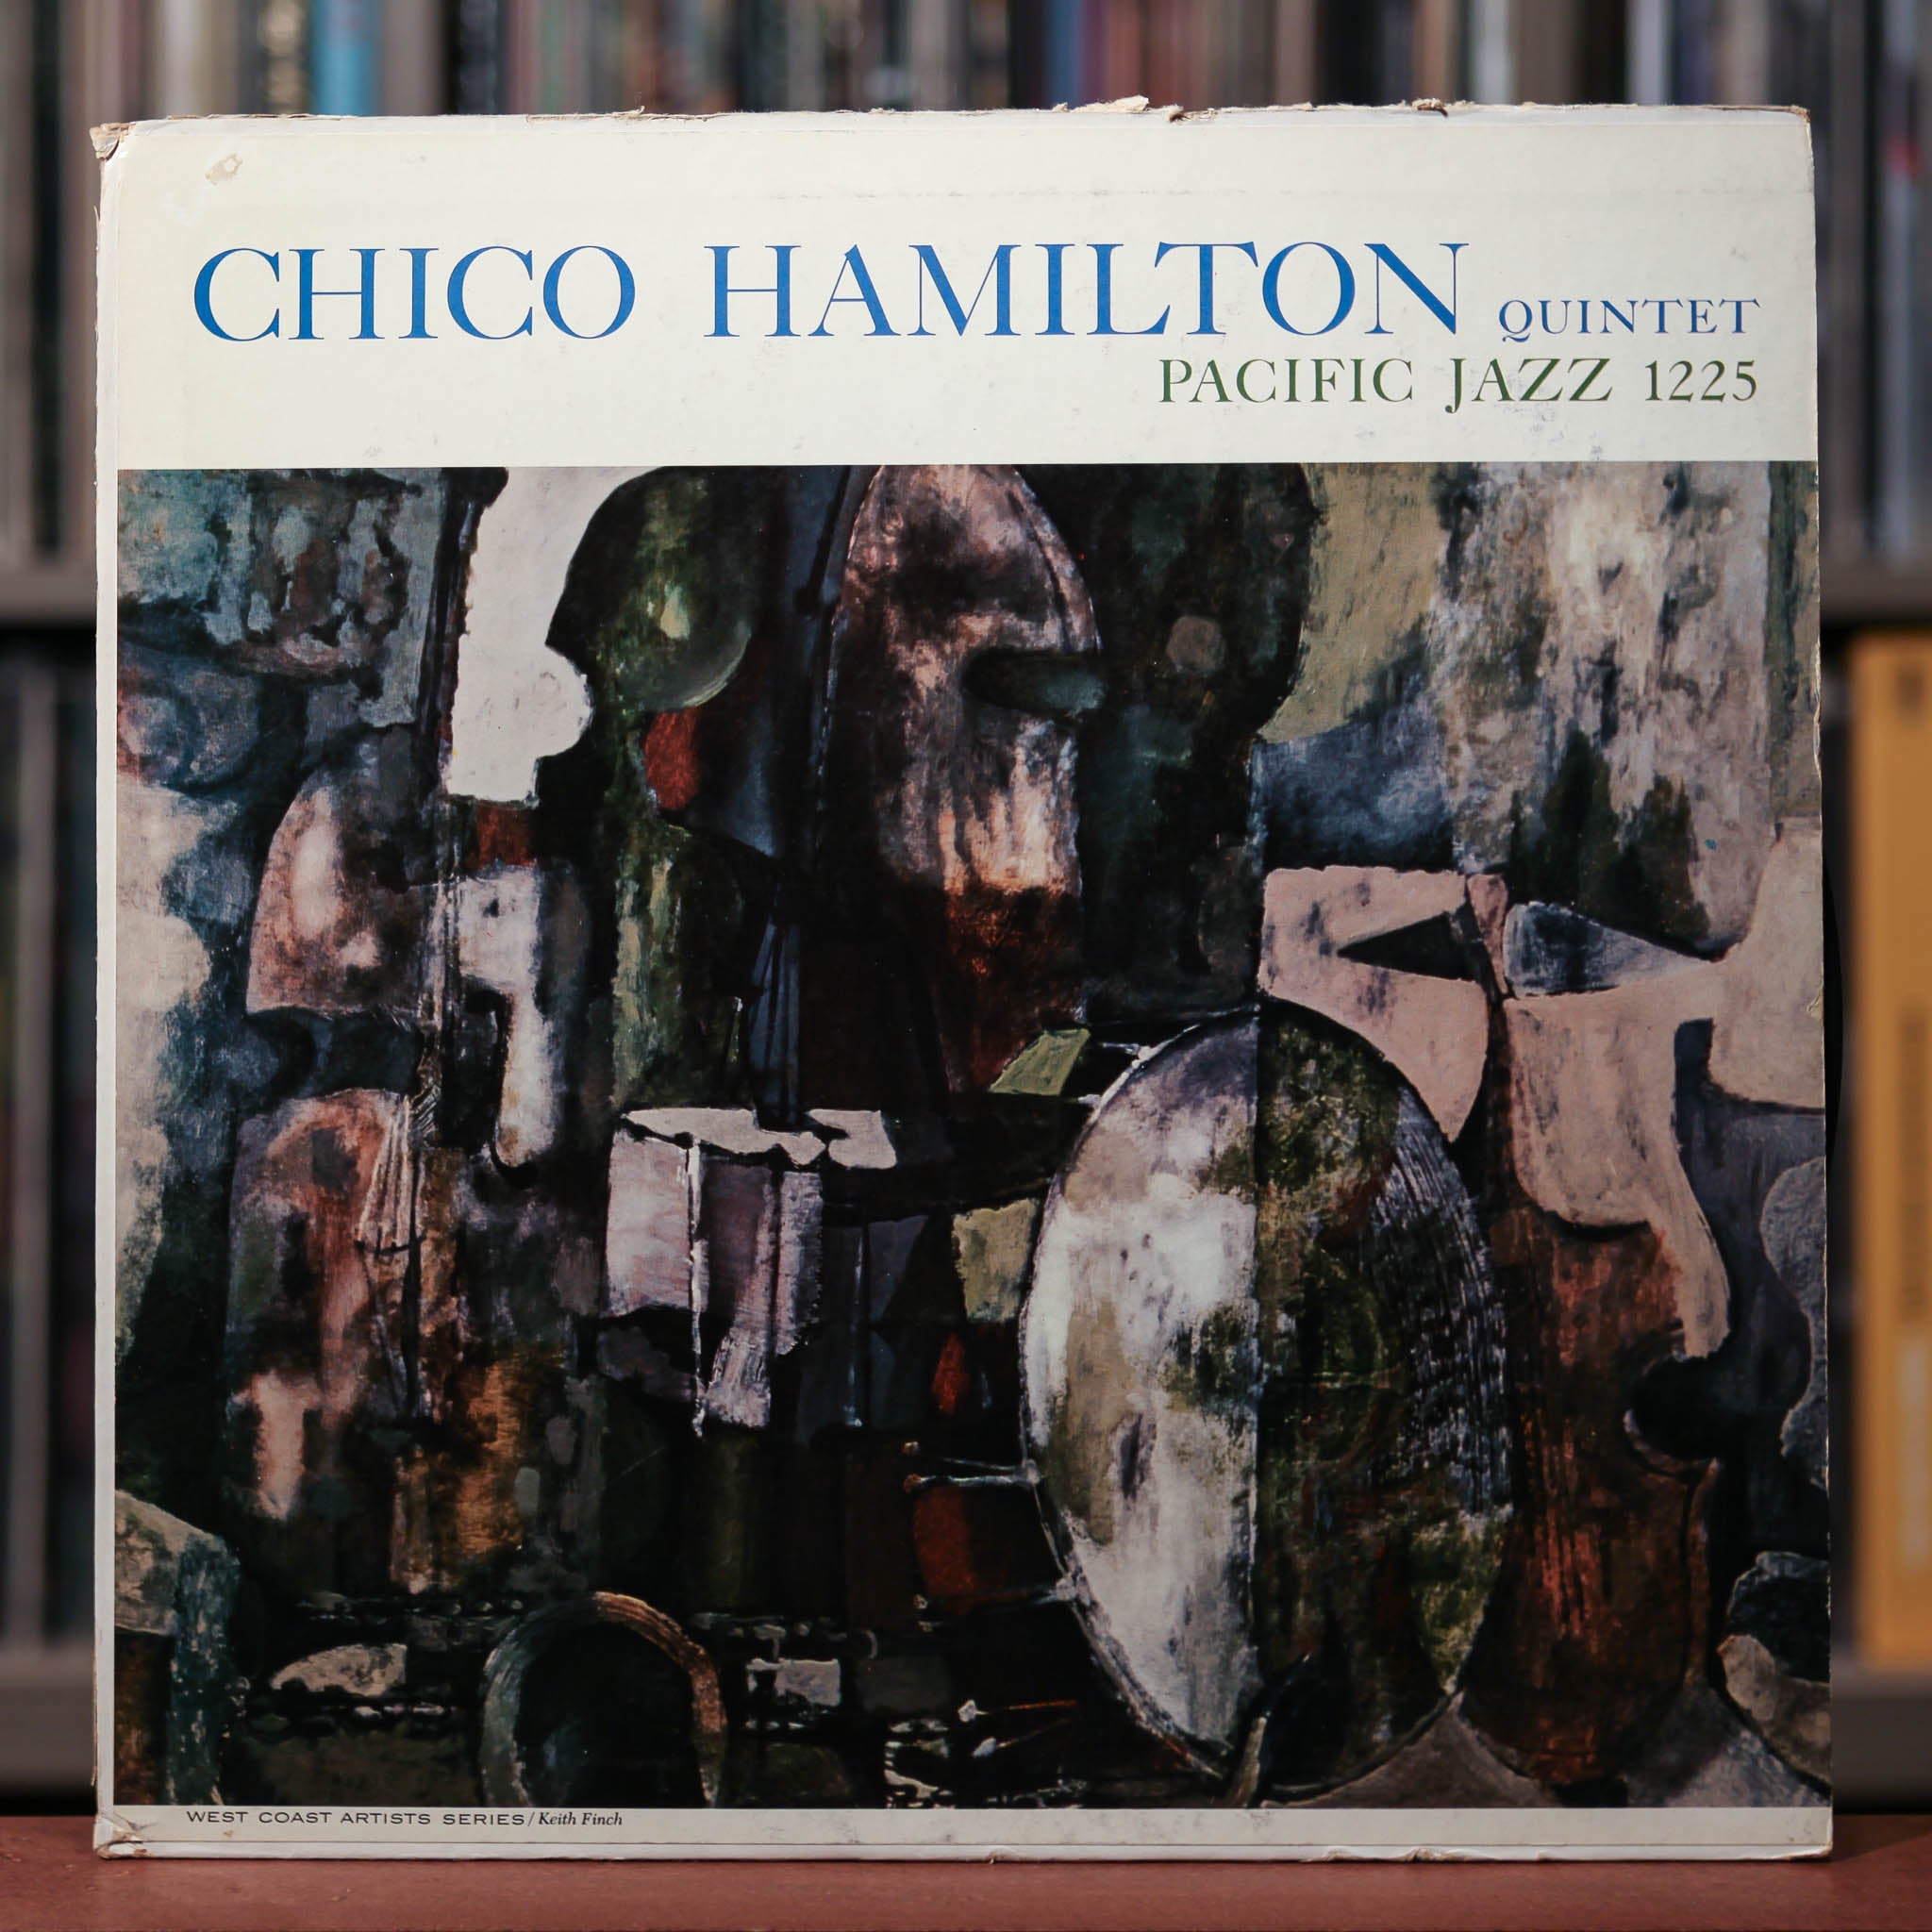 The Chico Hamilton Quintet - Self-Titled - 1957 Pacific Jazz